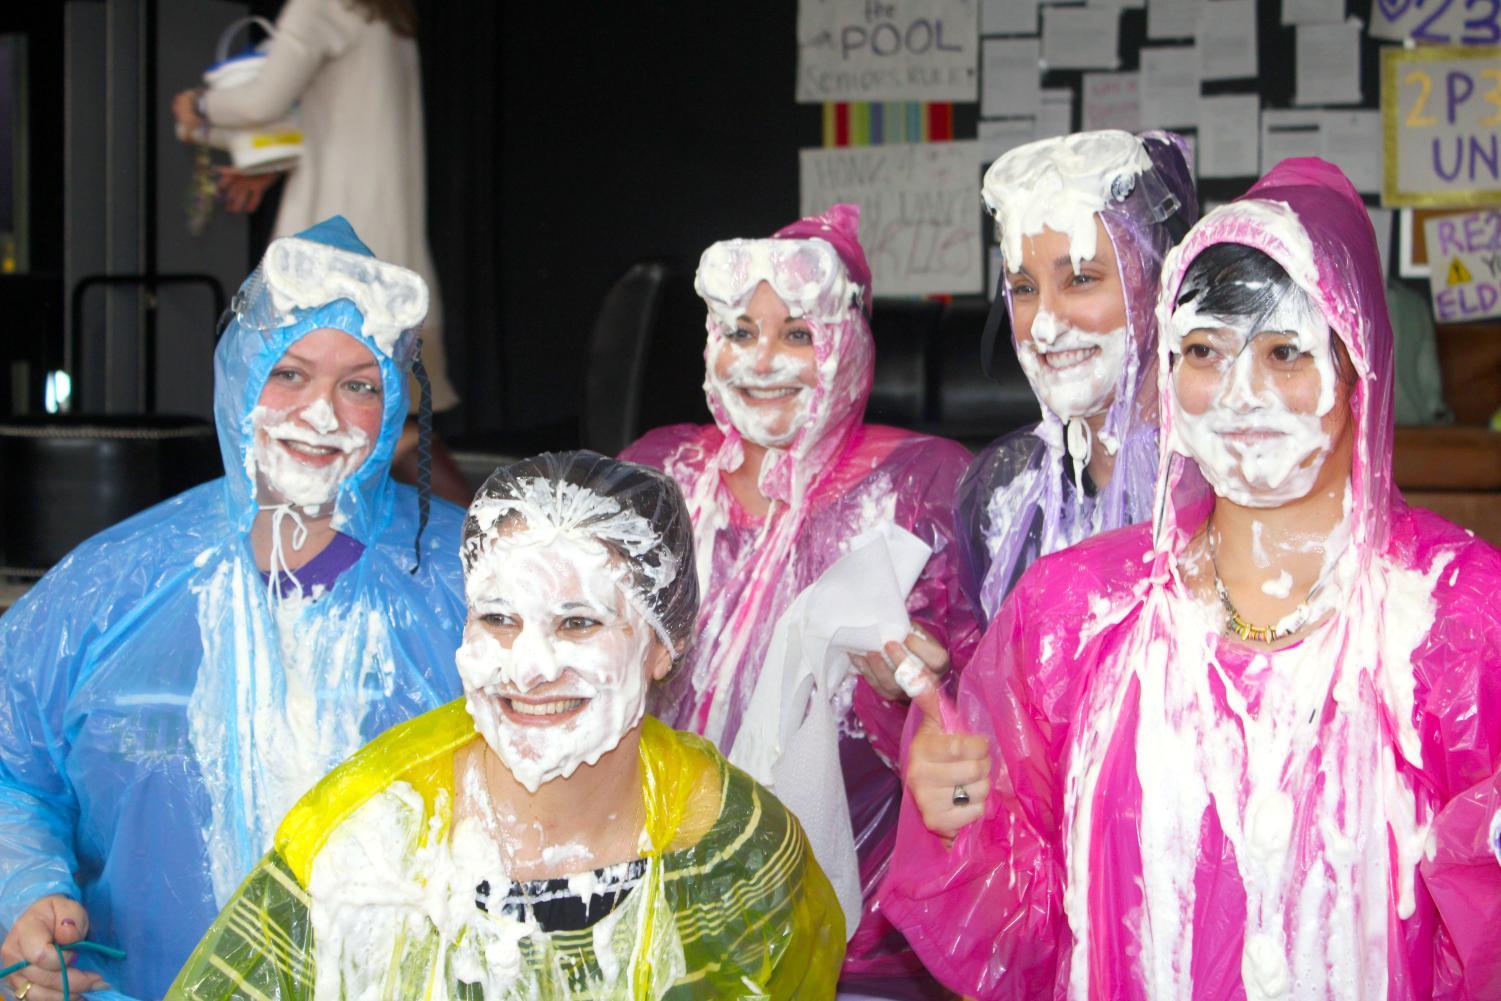 Teachers posing for a picture after being pied.